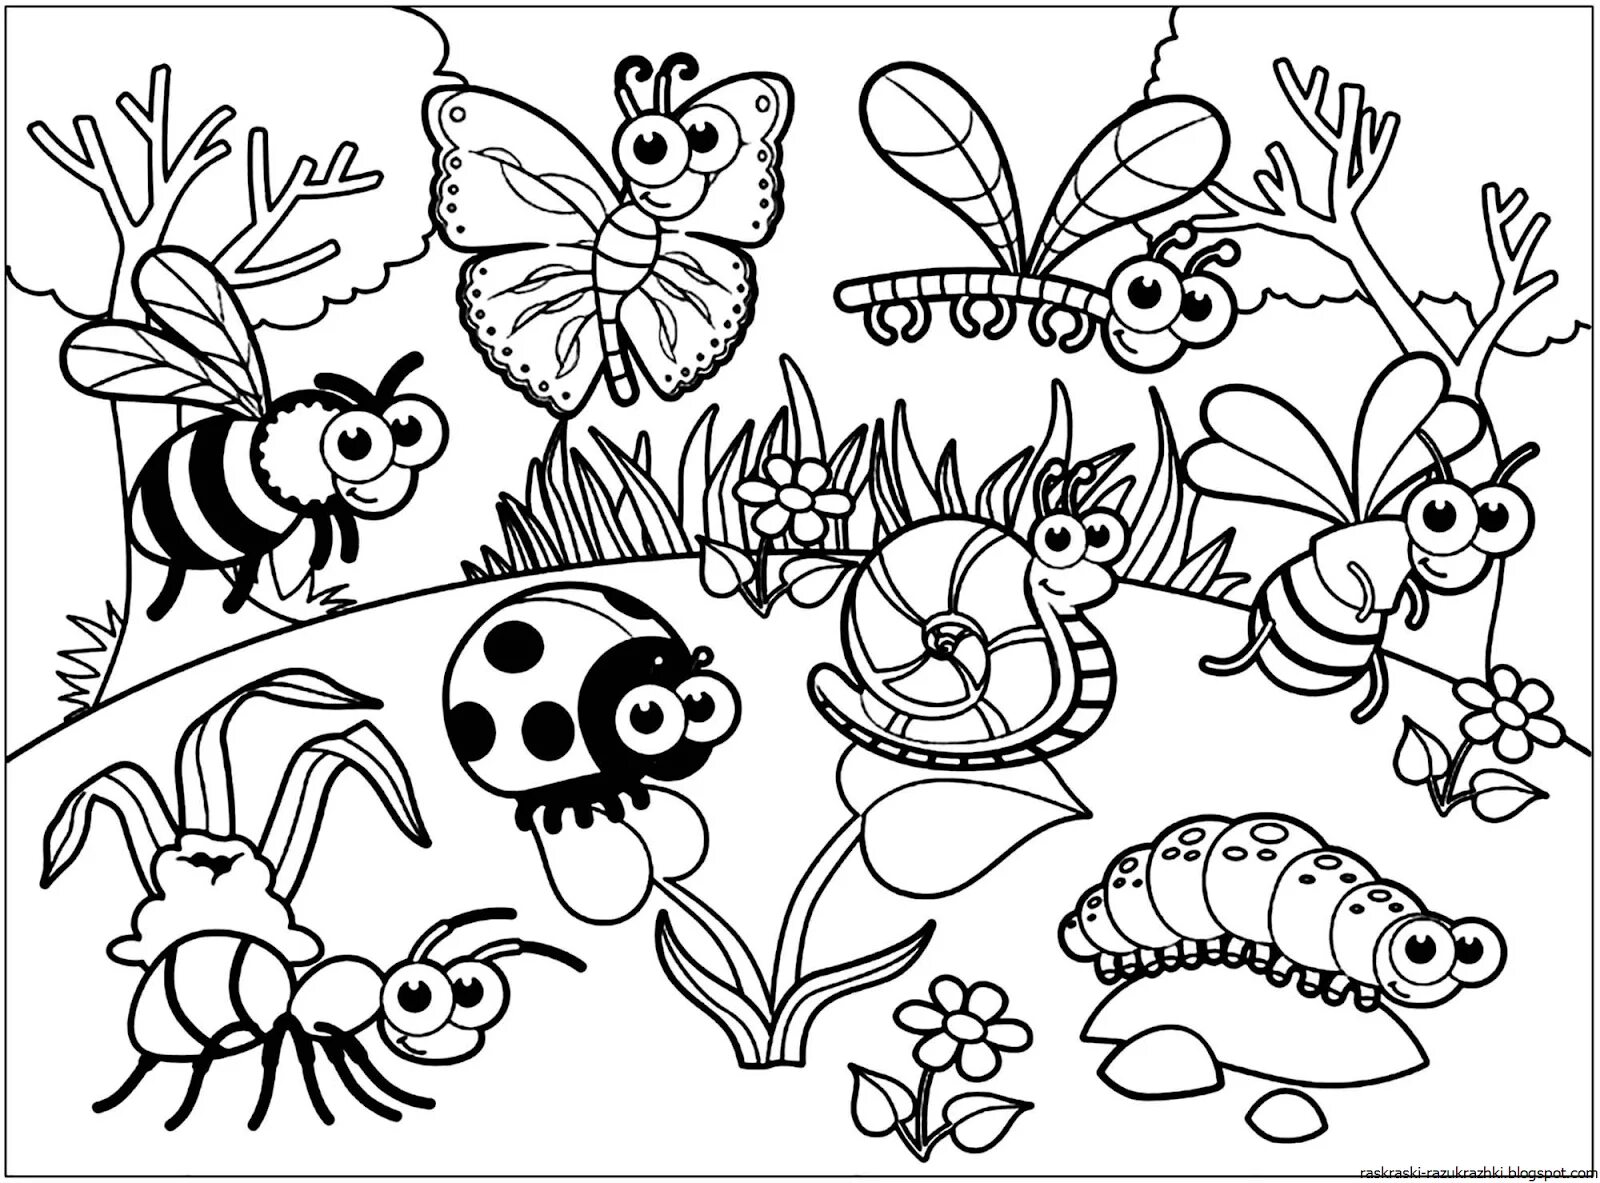 Insects for children 6 7 years old #10